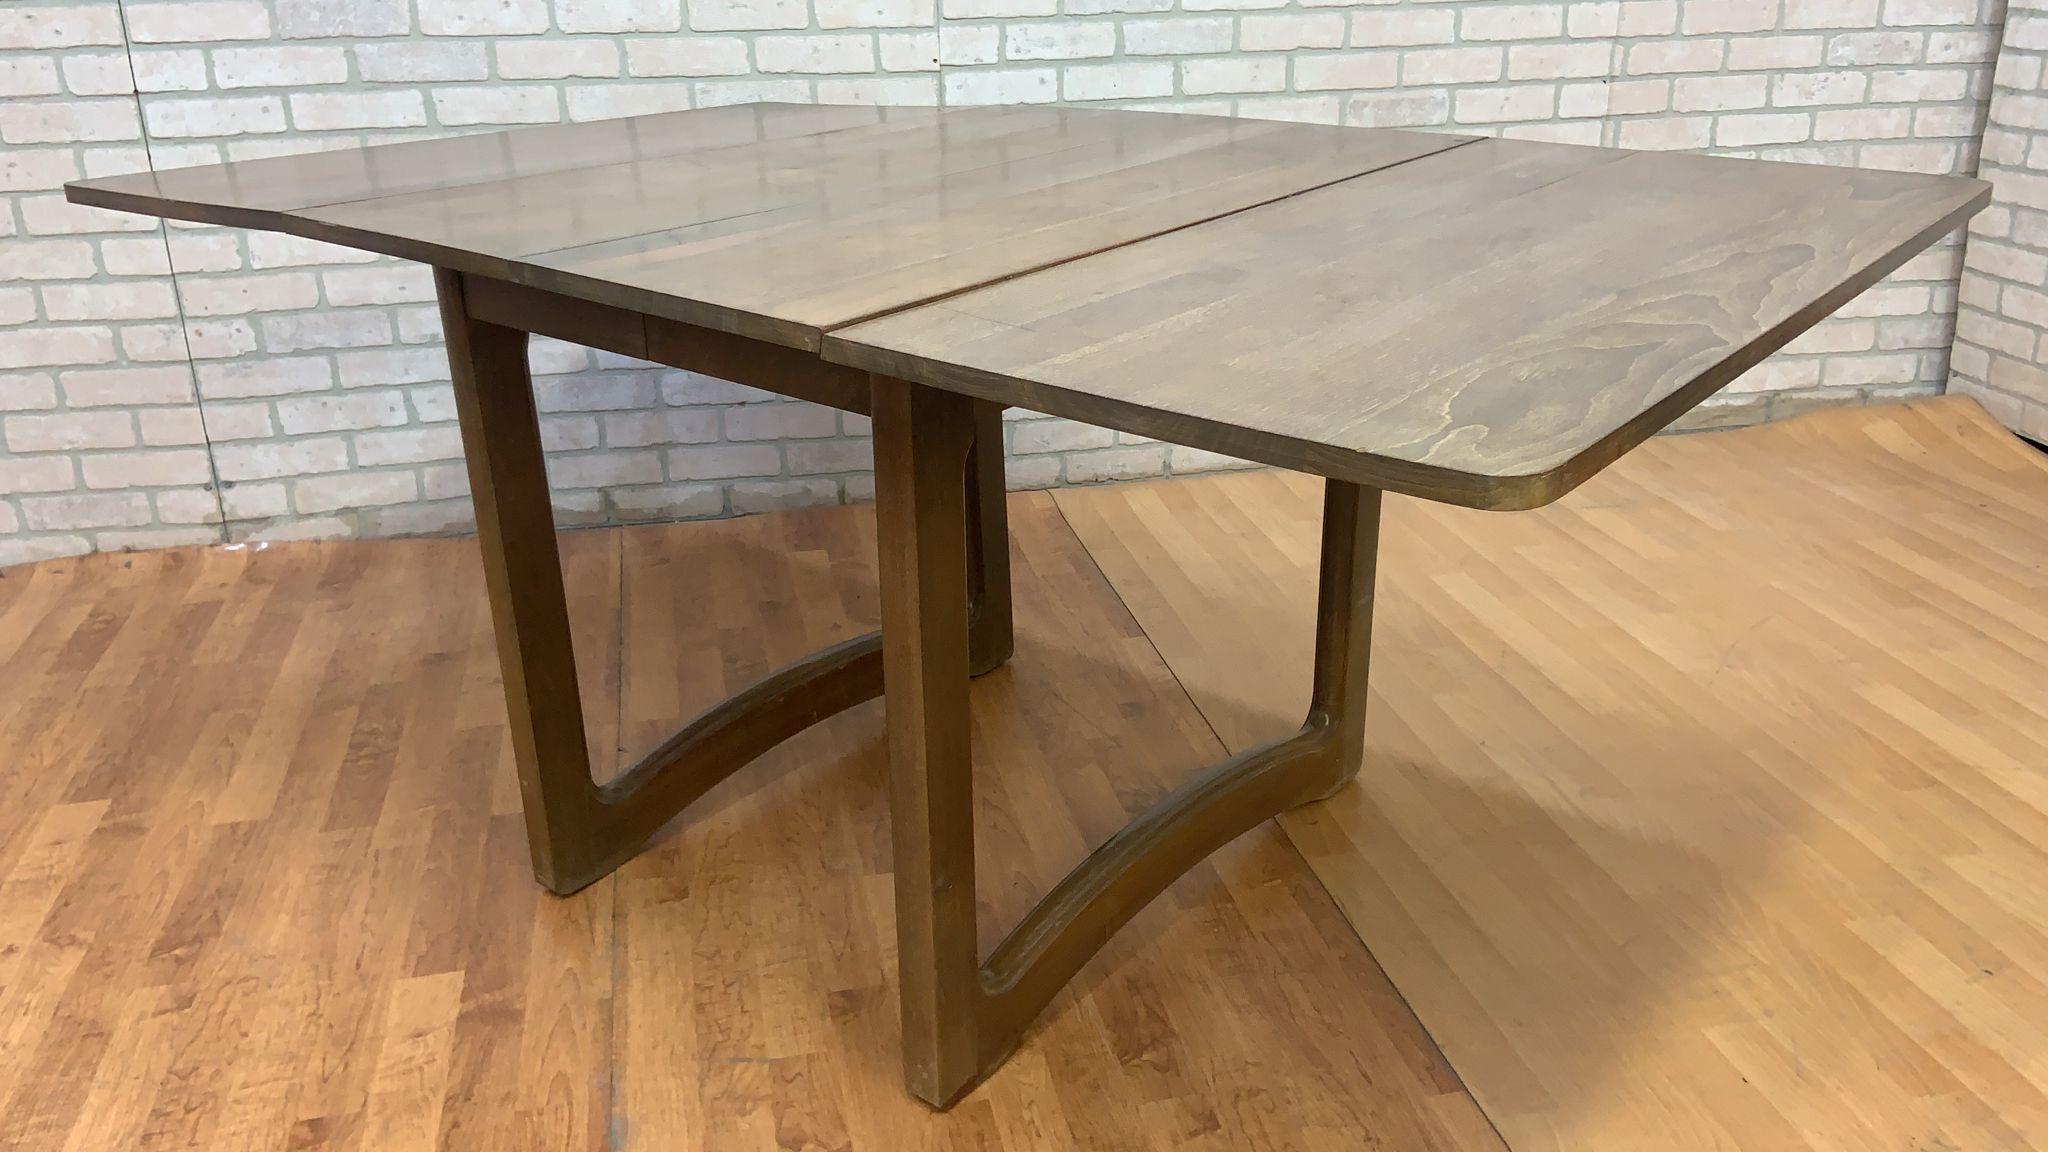 Mid Century Modern Scandinavian G-Plan Style Walnut Fold Down Dining Table and 6 Dining Chairs in Original Fabric - 7 Piece Set 

The wood will be cleaned up prior to shipping. 

Circa 1970

Dimensions: 

Table
H 30”
W 65” when opened
W 37” when